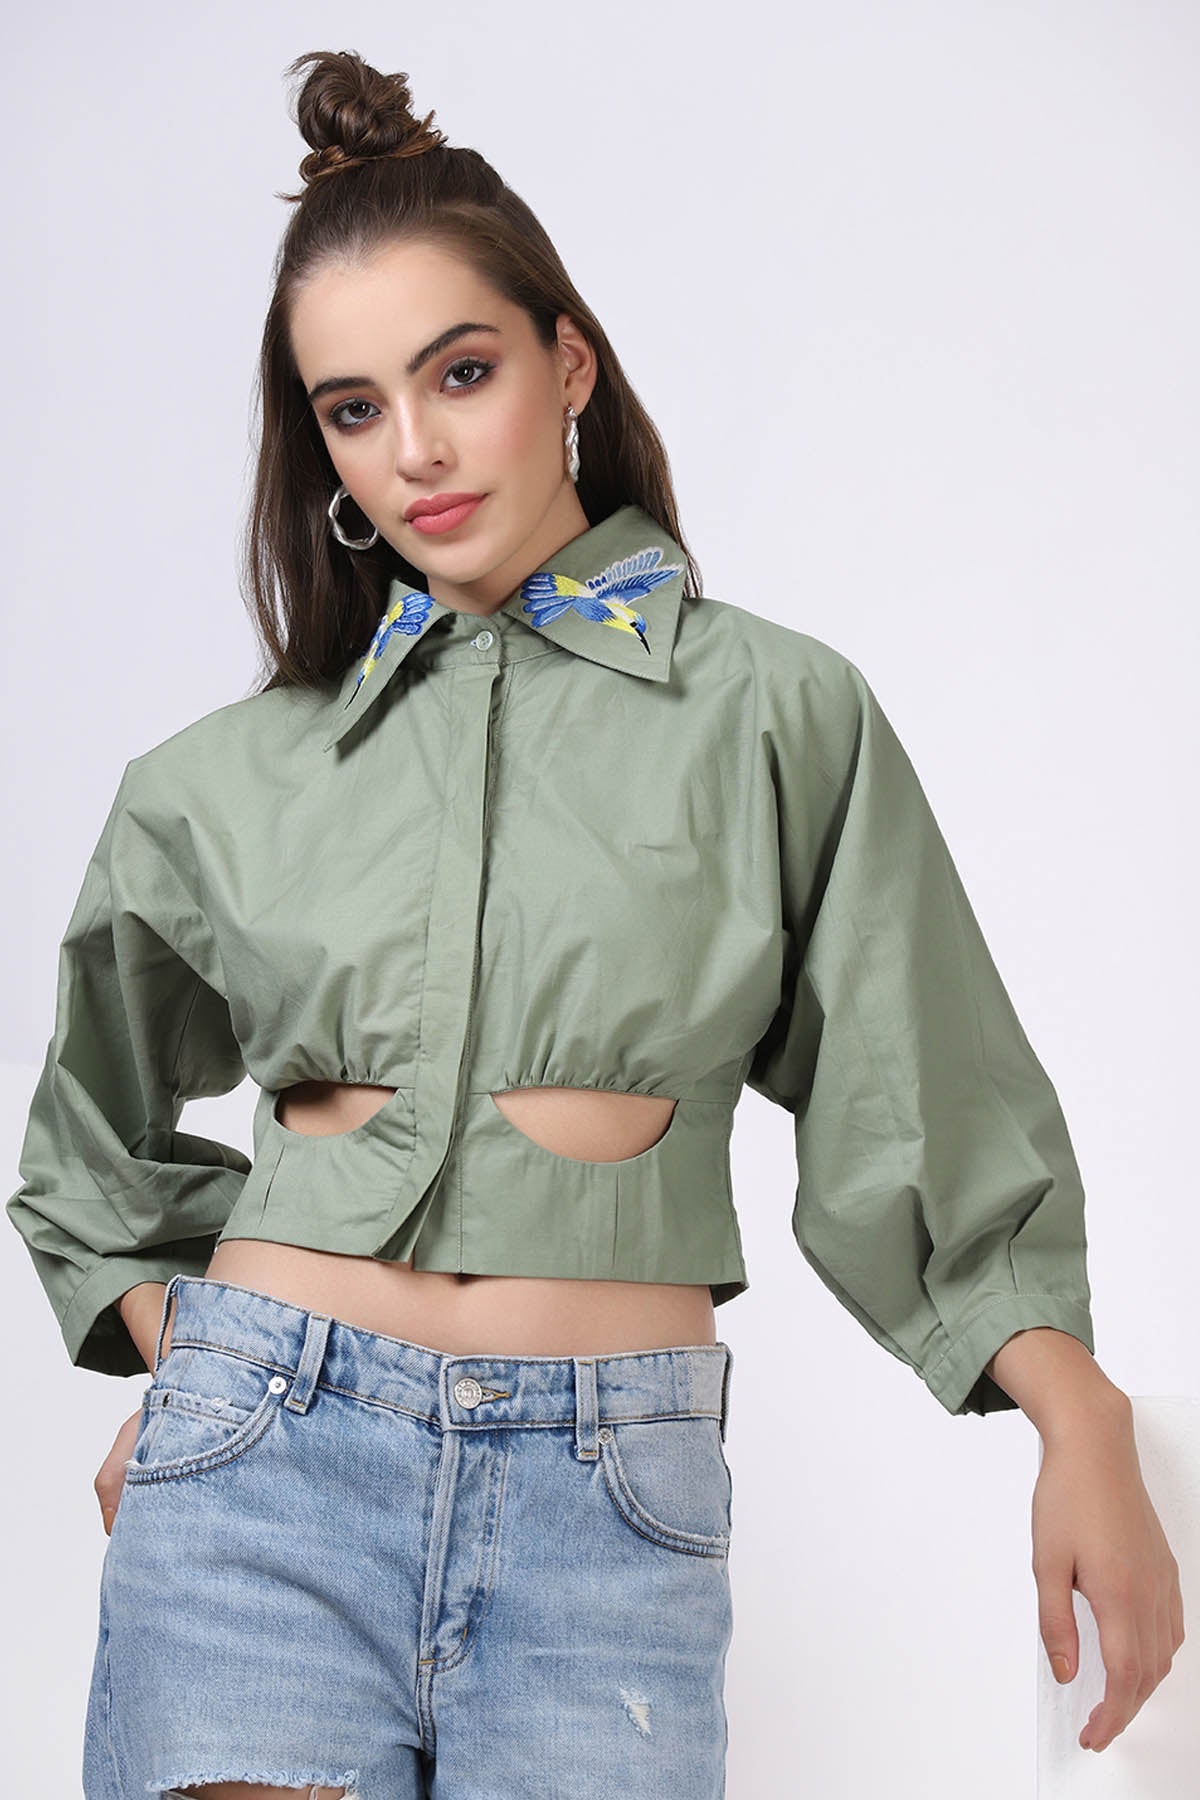 Bohobi Green Embroidered Cut-Out Top For Women Online at ScrollnShops